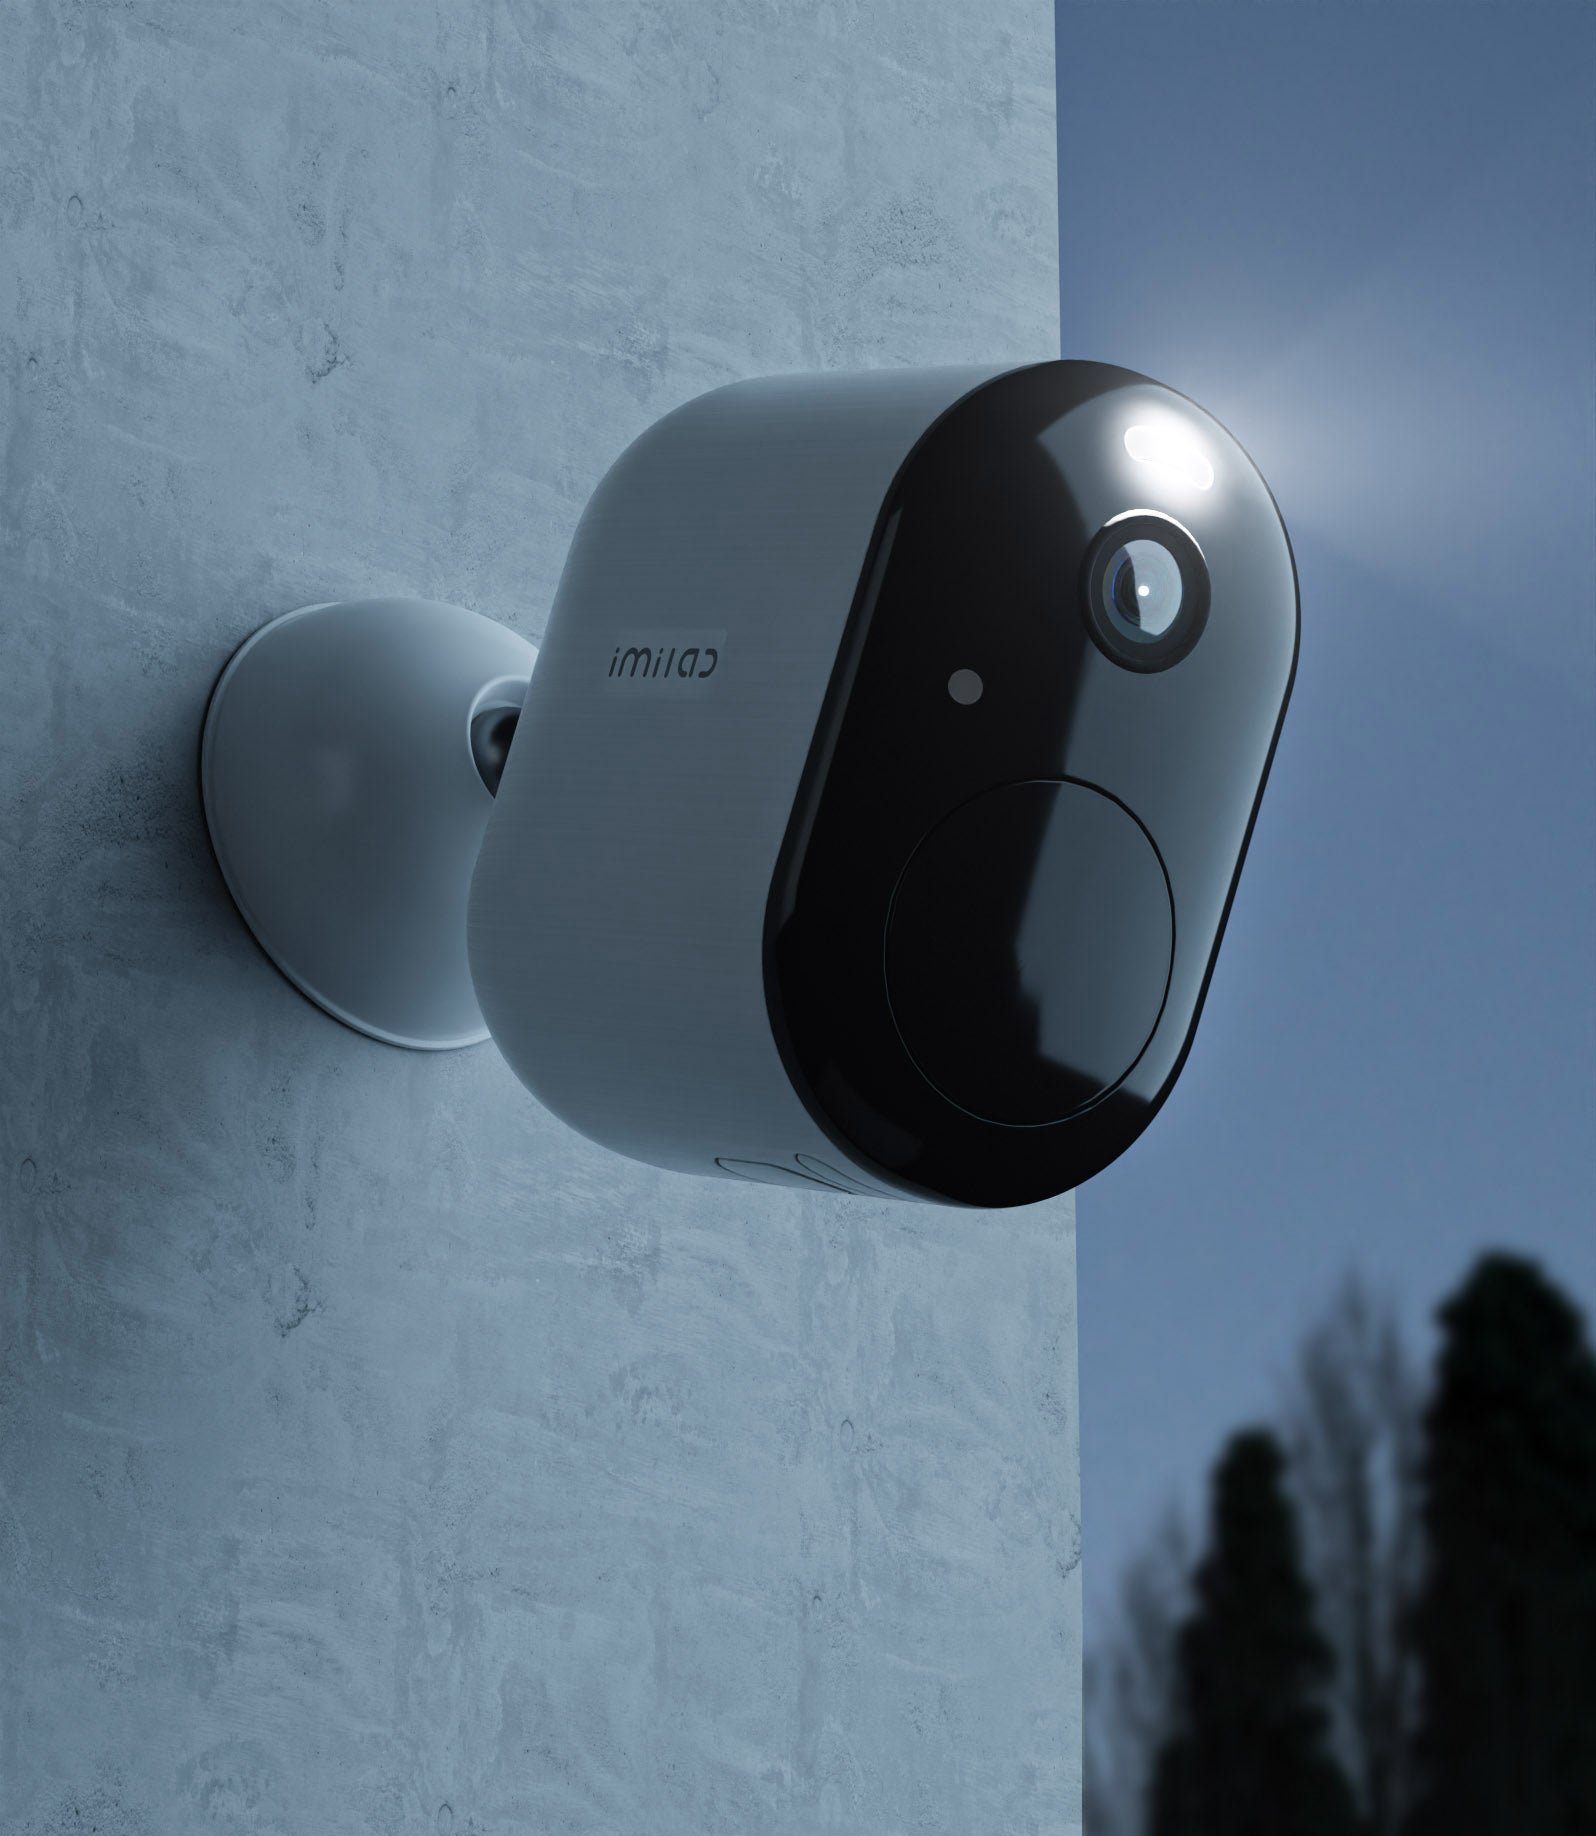 EC4-Smart-Monitor-Camera-Mounted-on-White-Home-Wall-Outdoors-At-Night